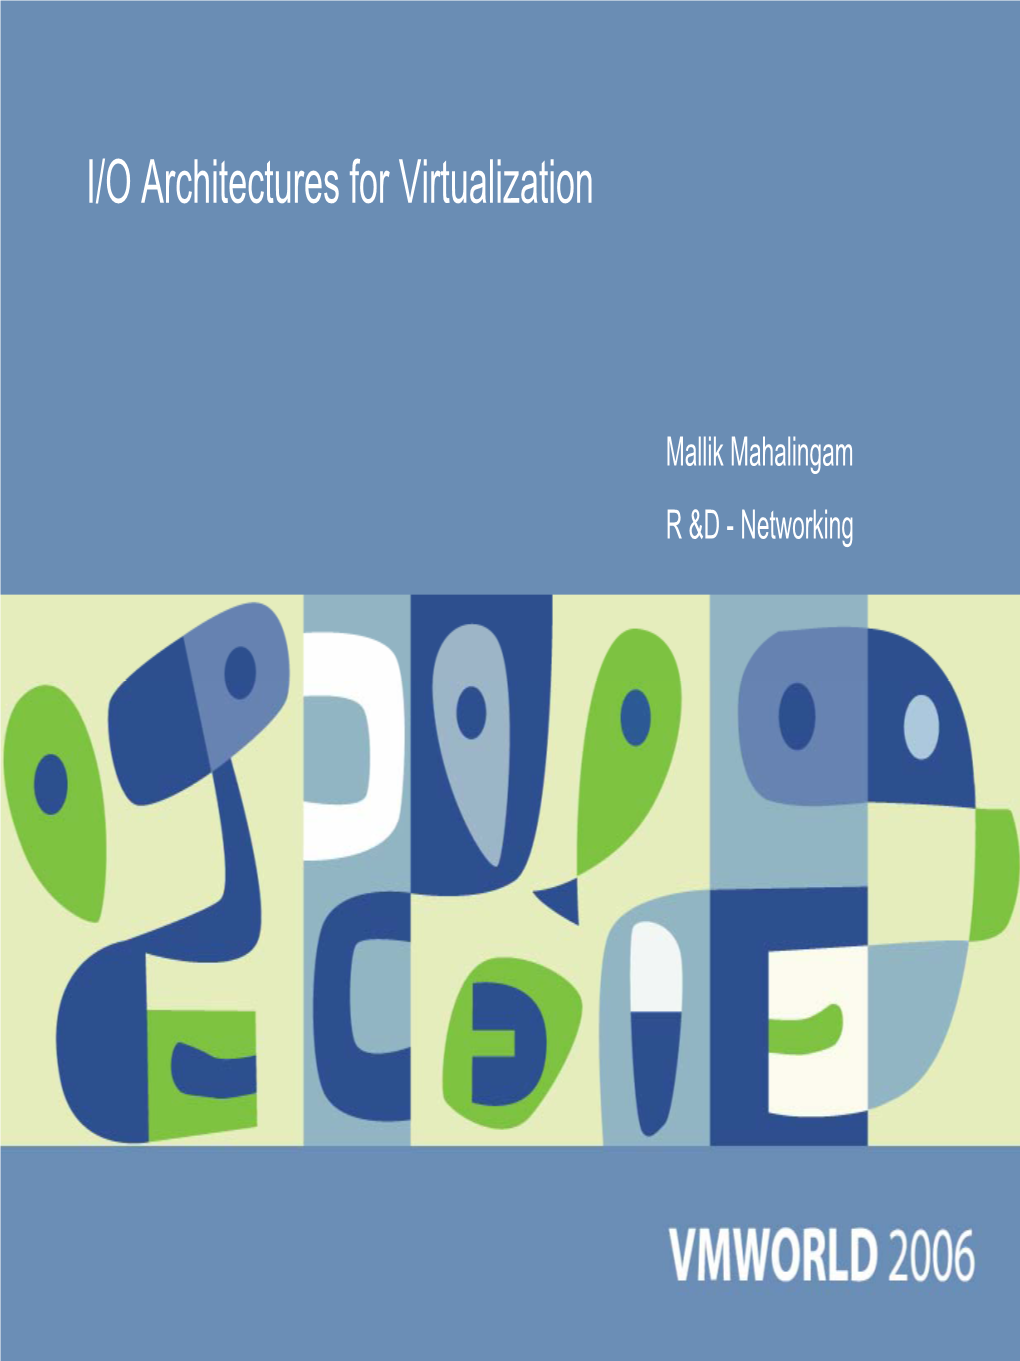 I/O Architectures for Virtualization